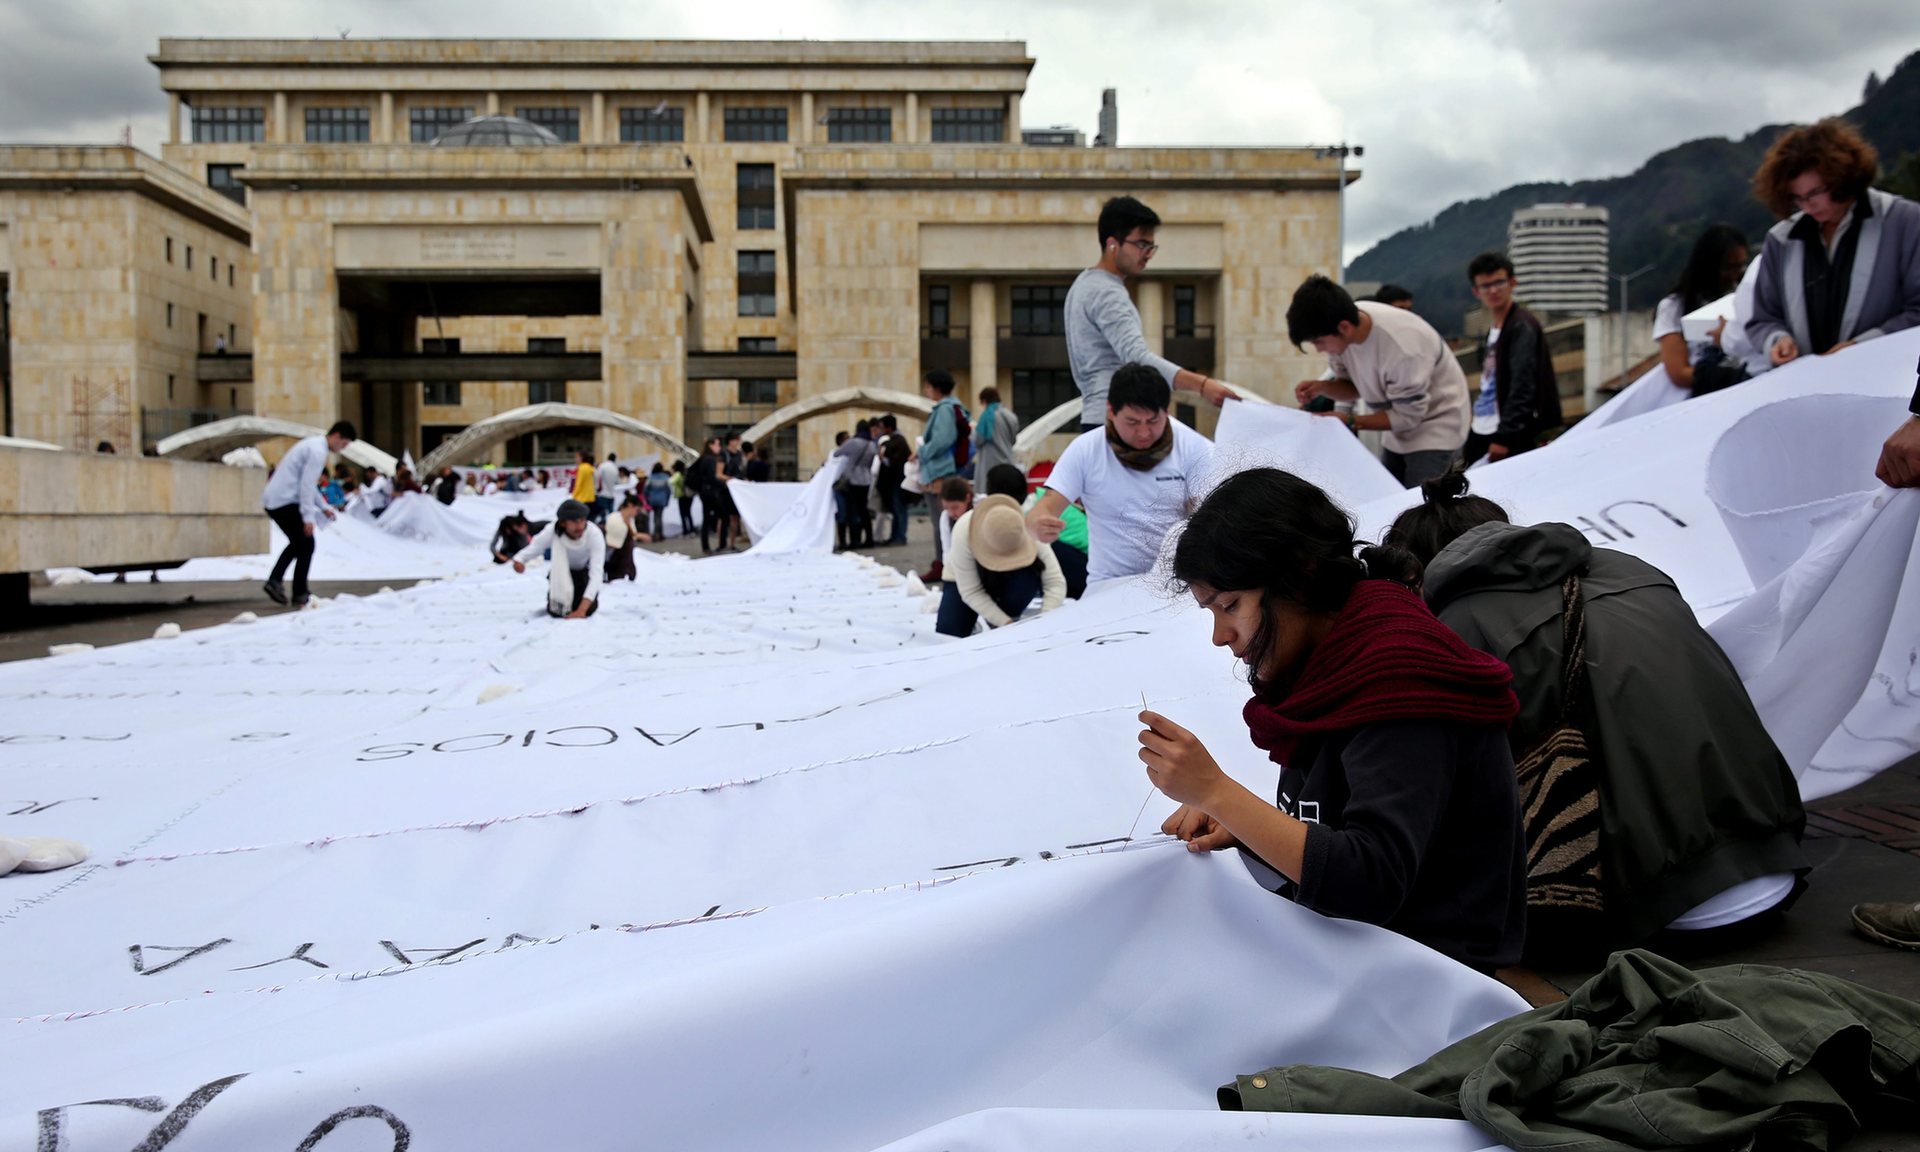  A group of people participate in an artistic intervention lead by the Colombian artist Doris Salcedo in Bogotá on Tuesday. Photograph: Leonardo Muñoz/EPA. Courtesy of the Guardian. 